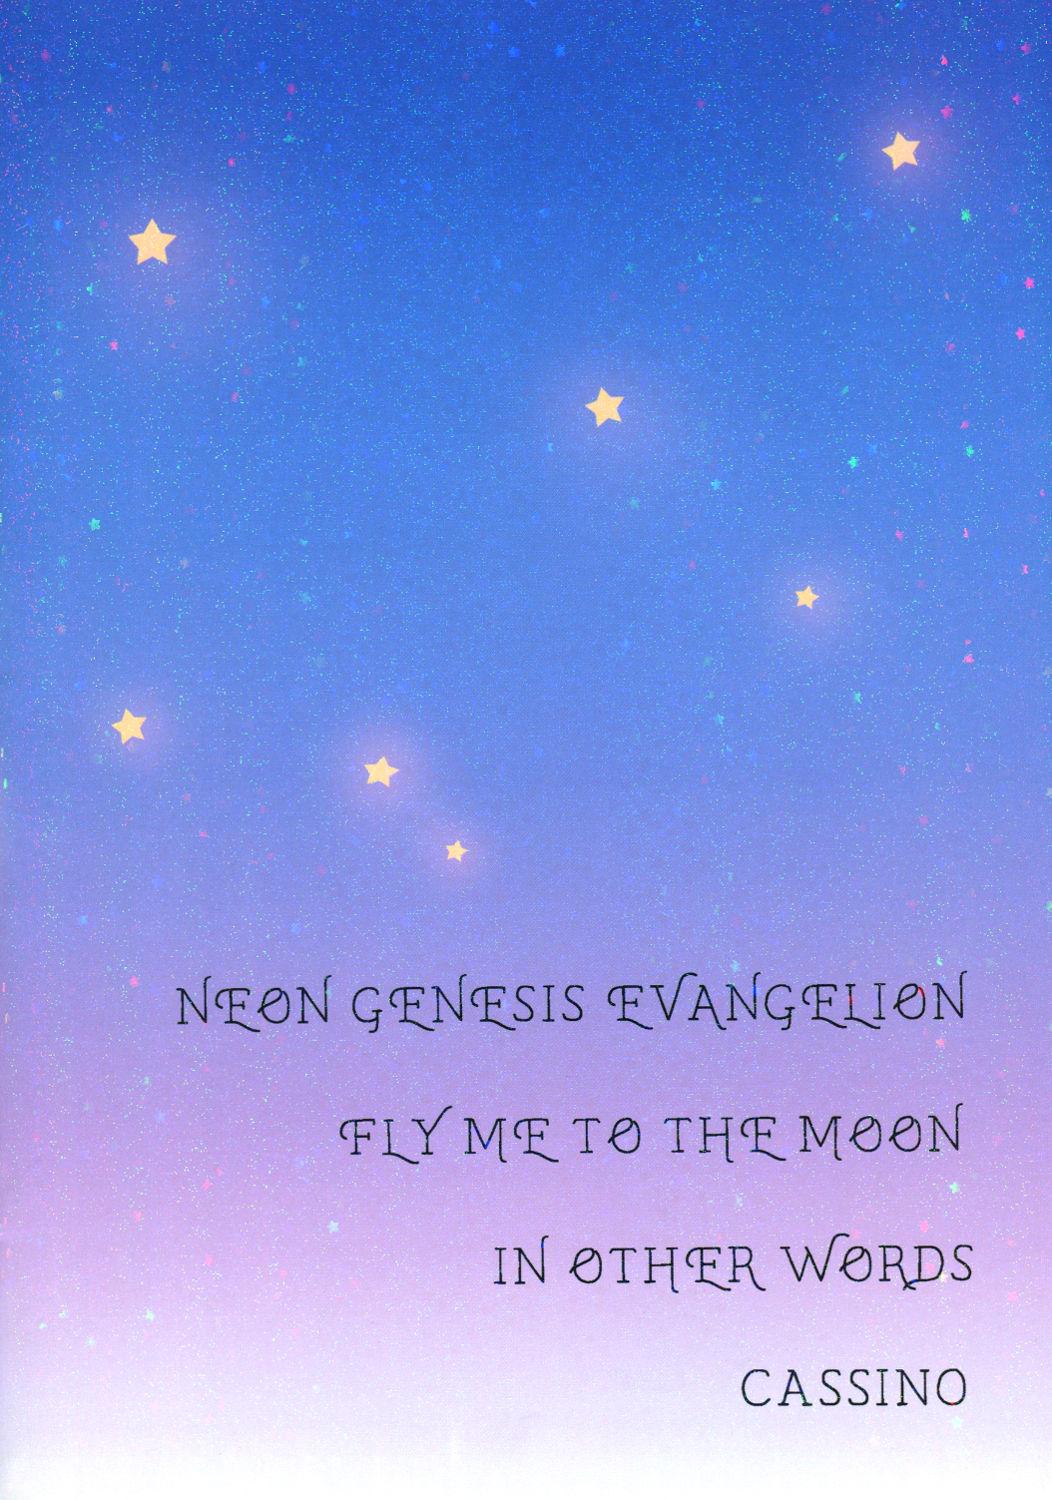 Polish FLY ME TO THE MOON - Neon genesis evangelion Virginity - Page 43